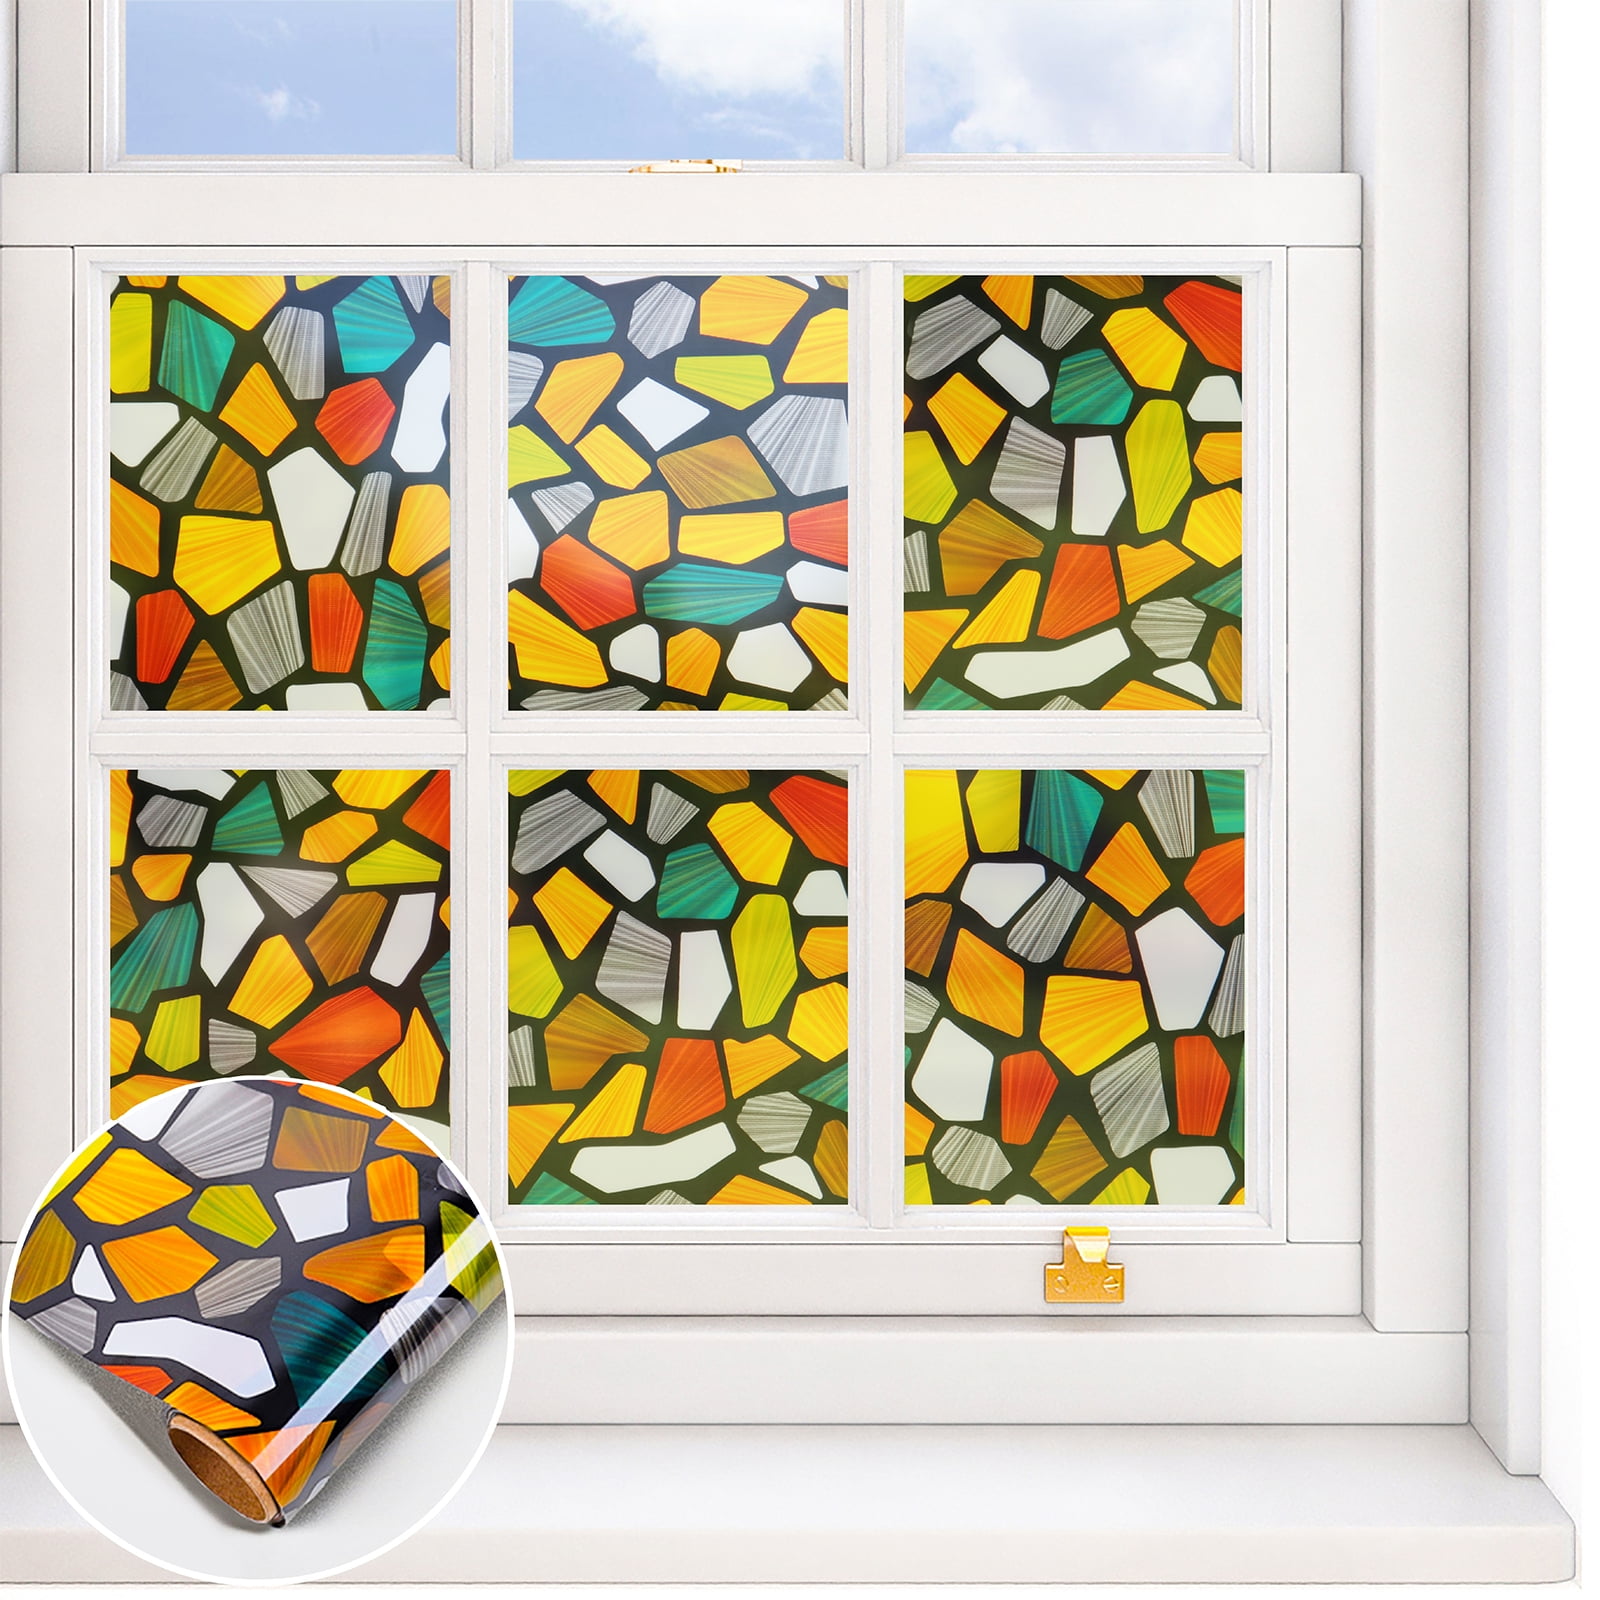 Details about   Static Cling Window Film Church Chapel Stained Glass Stickers Closet Decor Retro 